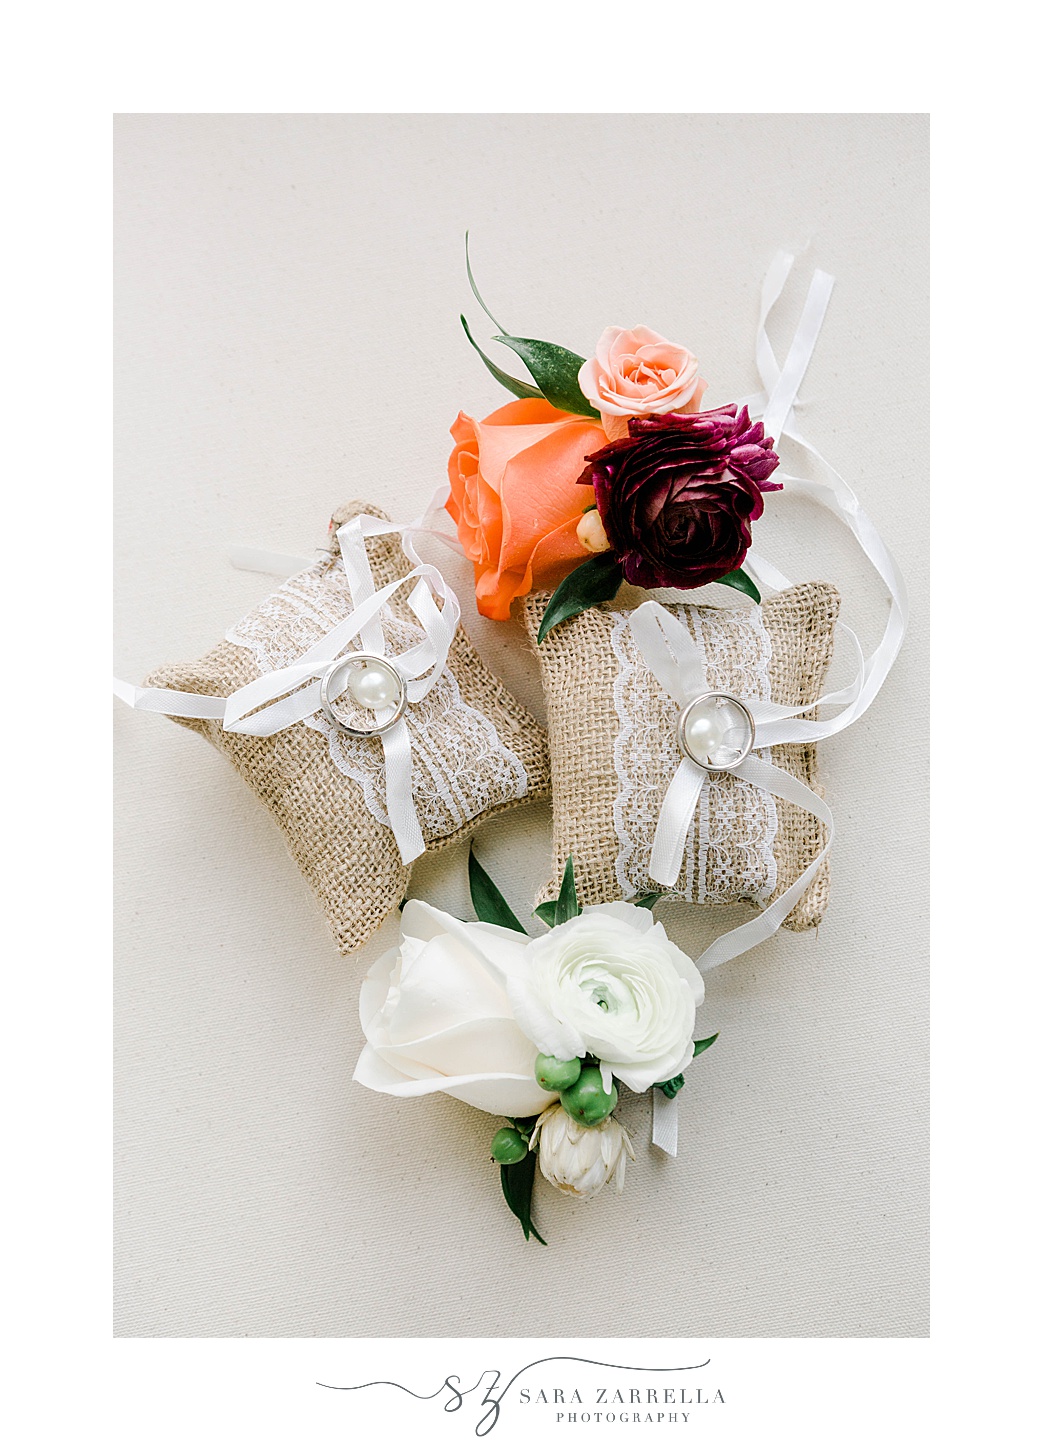 rings and boutonnières for grooms at Rosecliff Mansion wedding